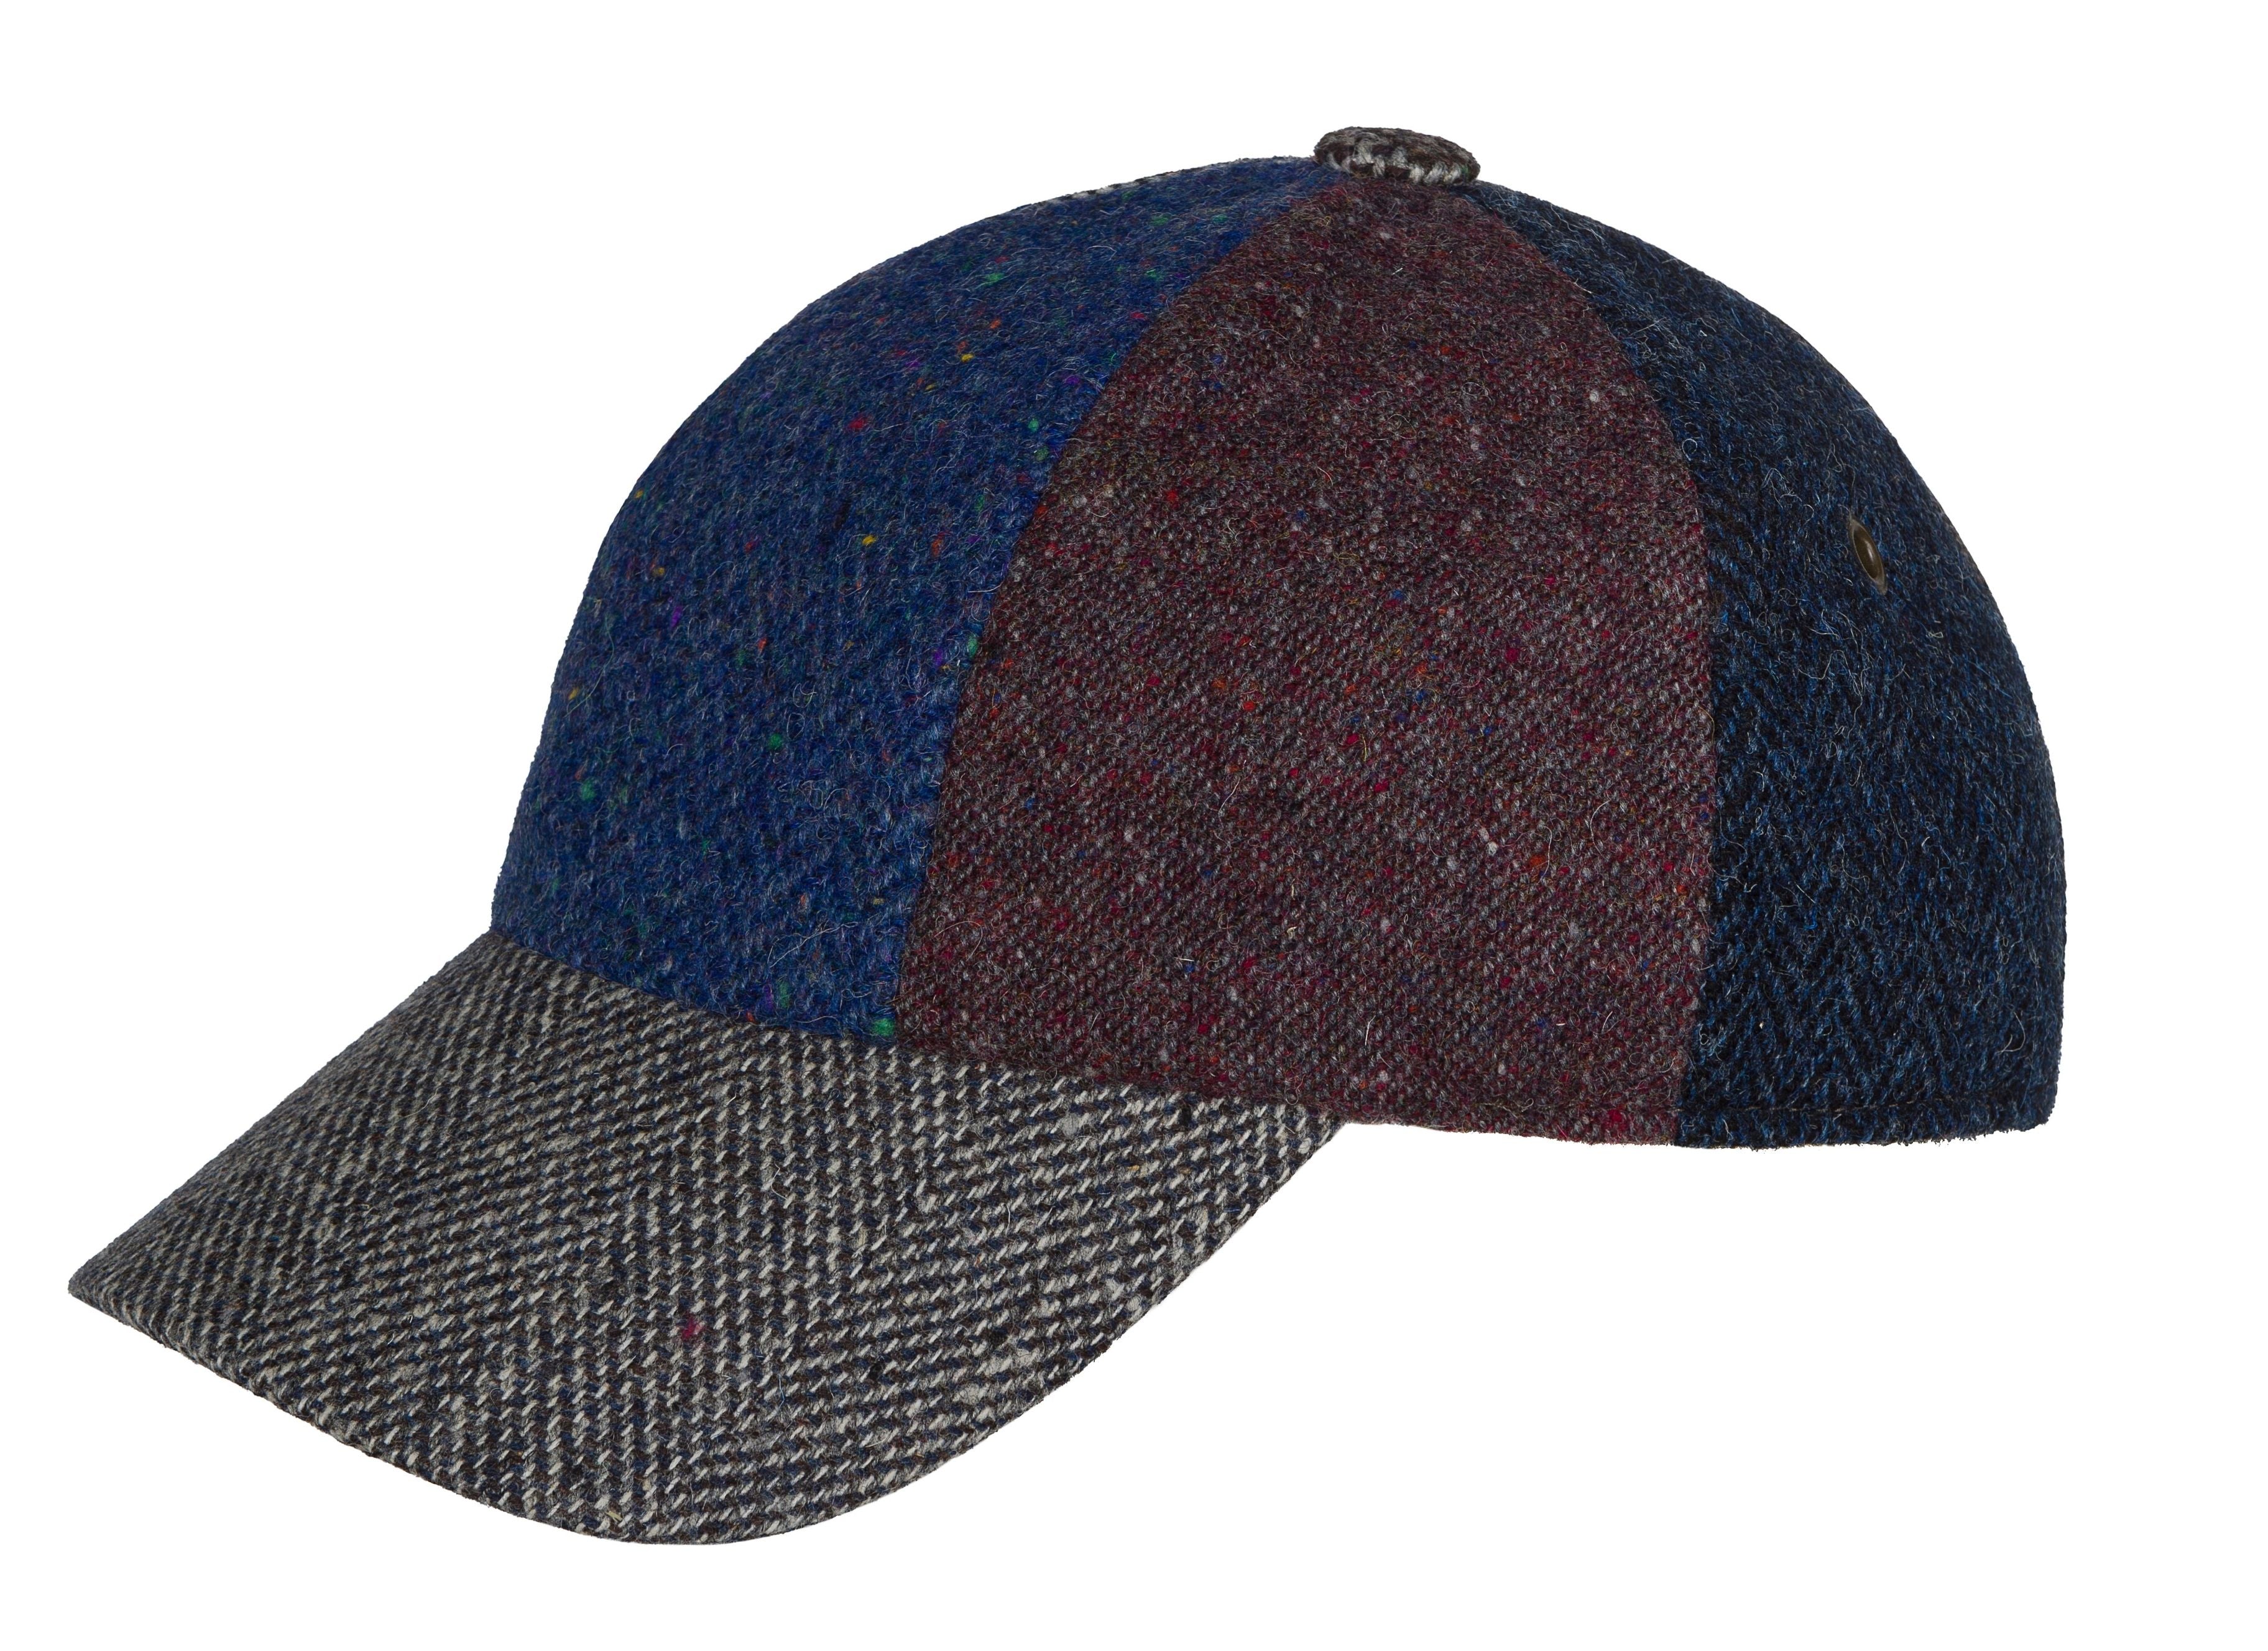 Baseball Cap Patchwork Tweed product side view